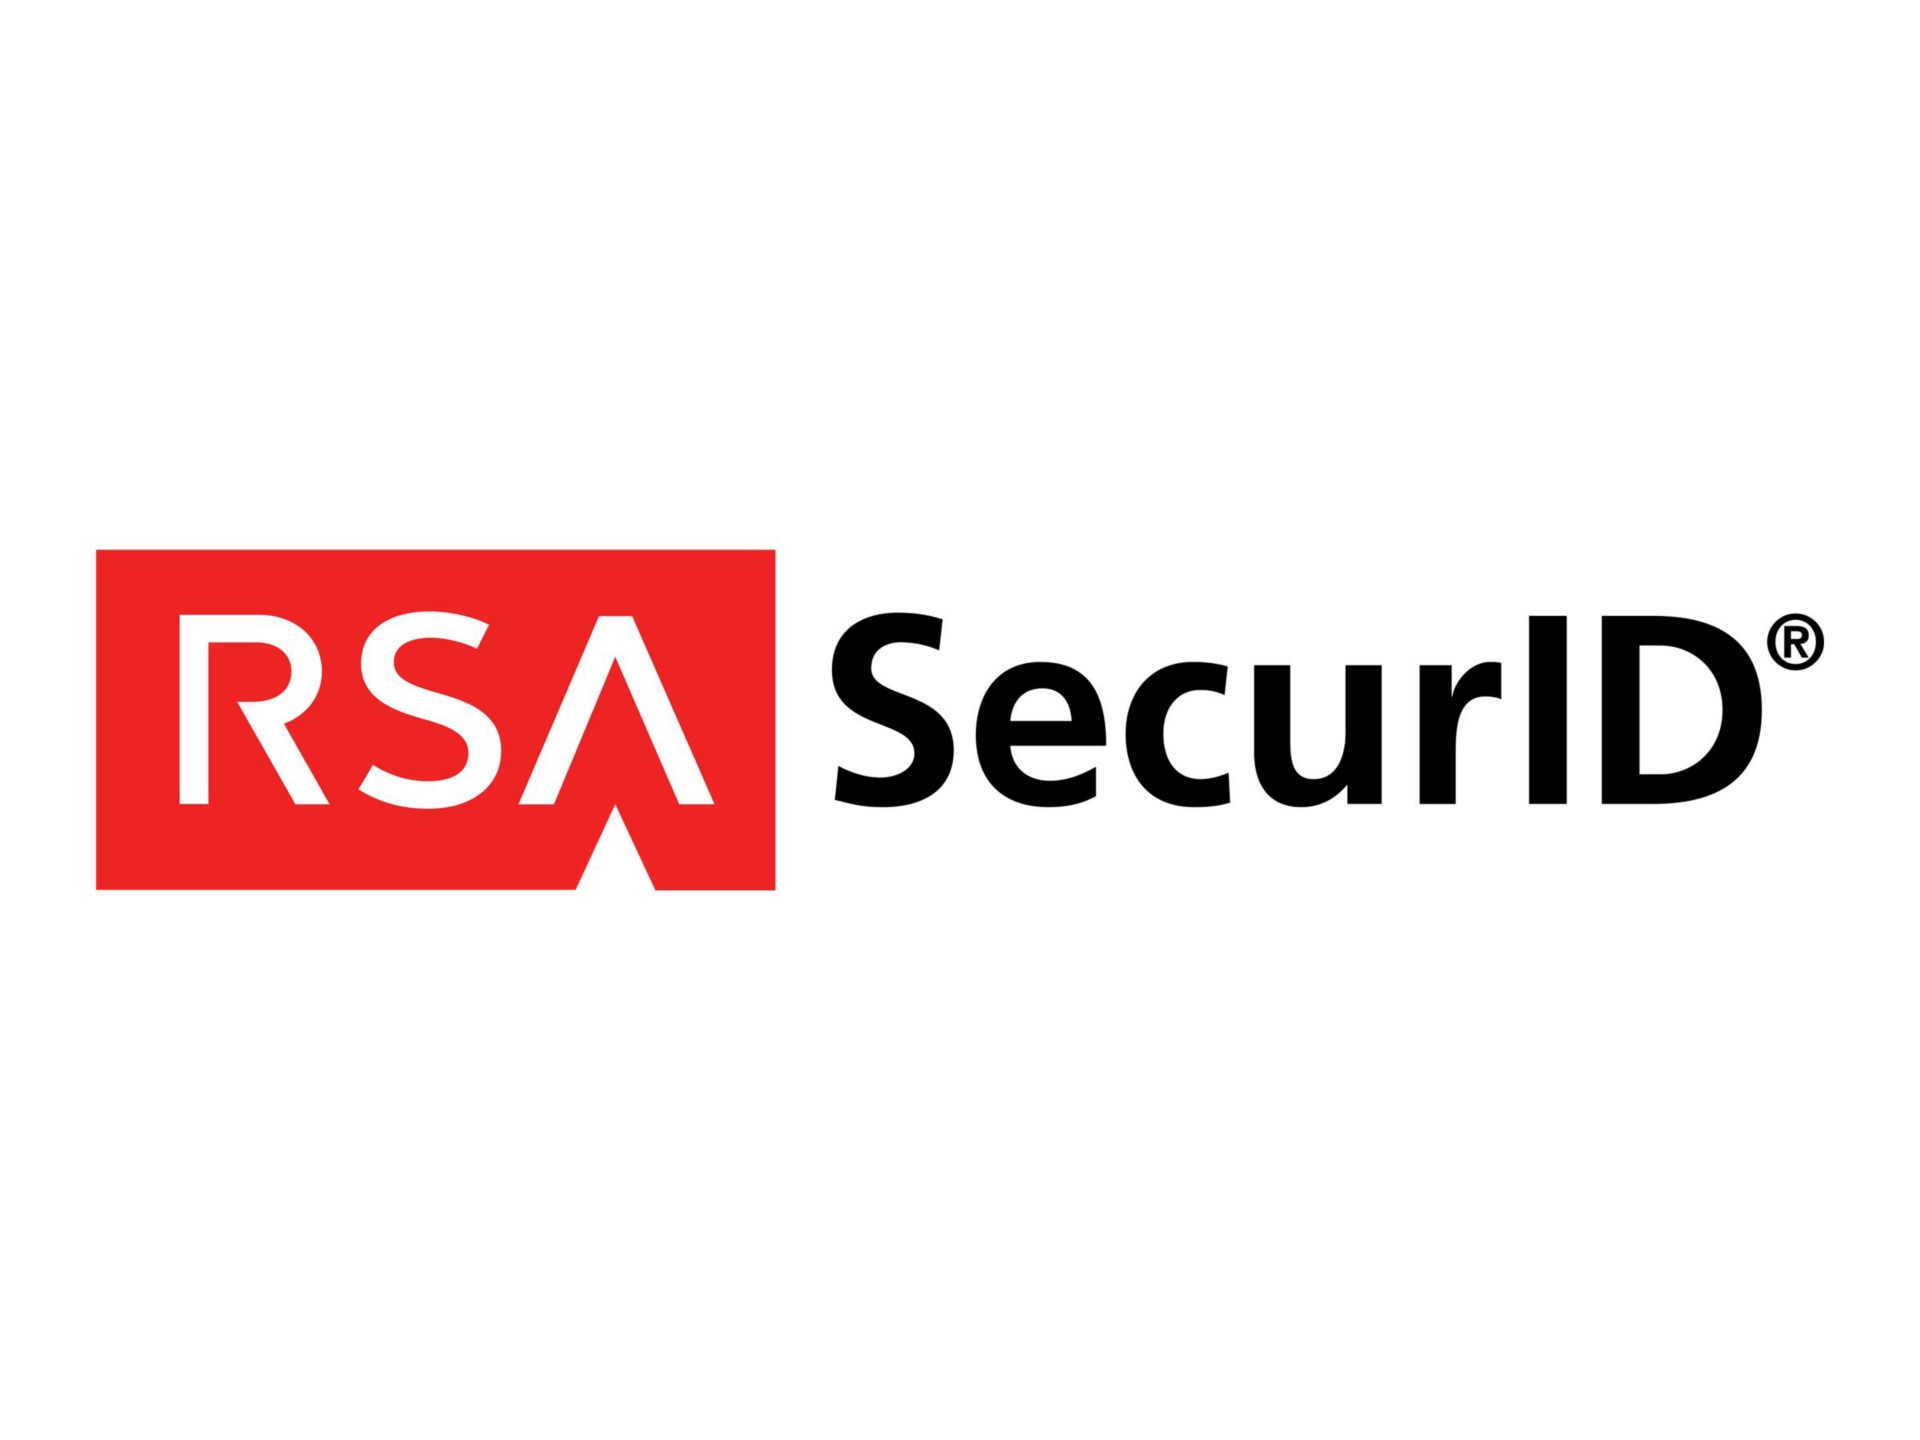 RSA SecurID Software Token Seeds (SID820) - subscription license (3 years) - 1 user